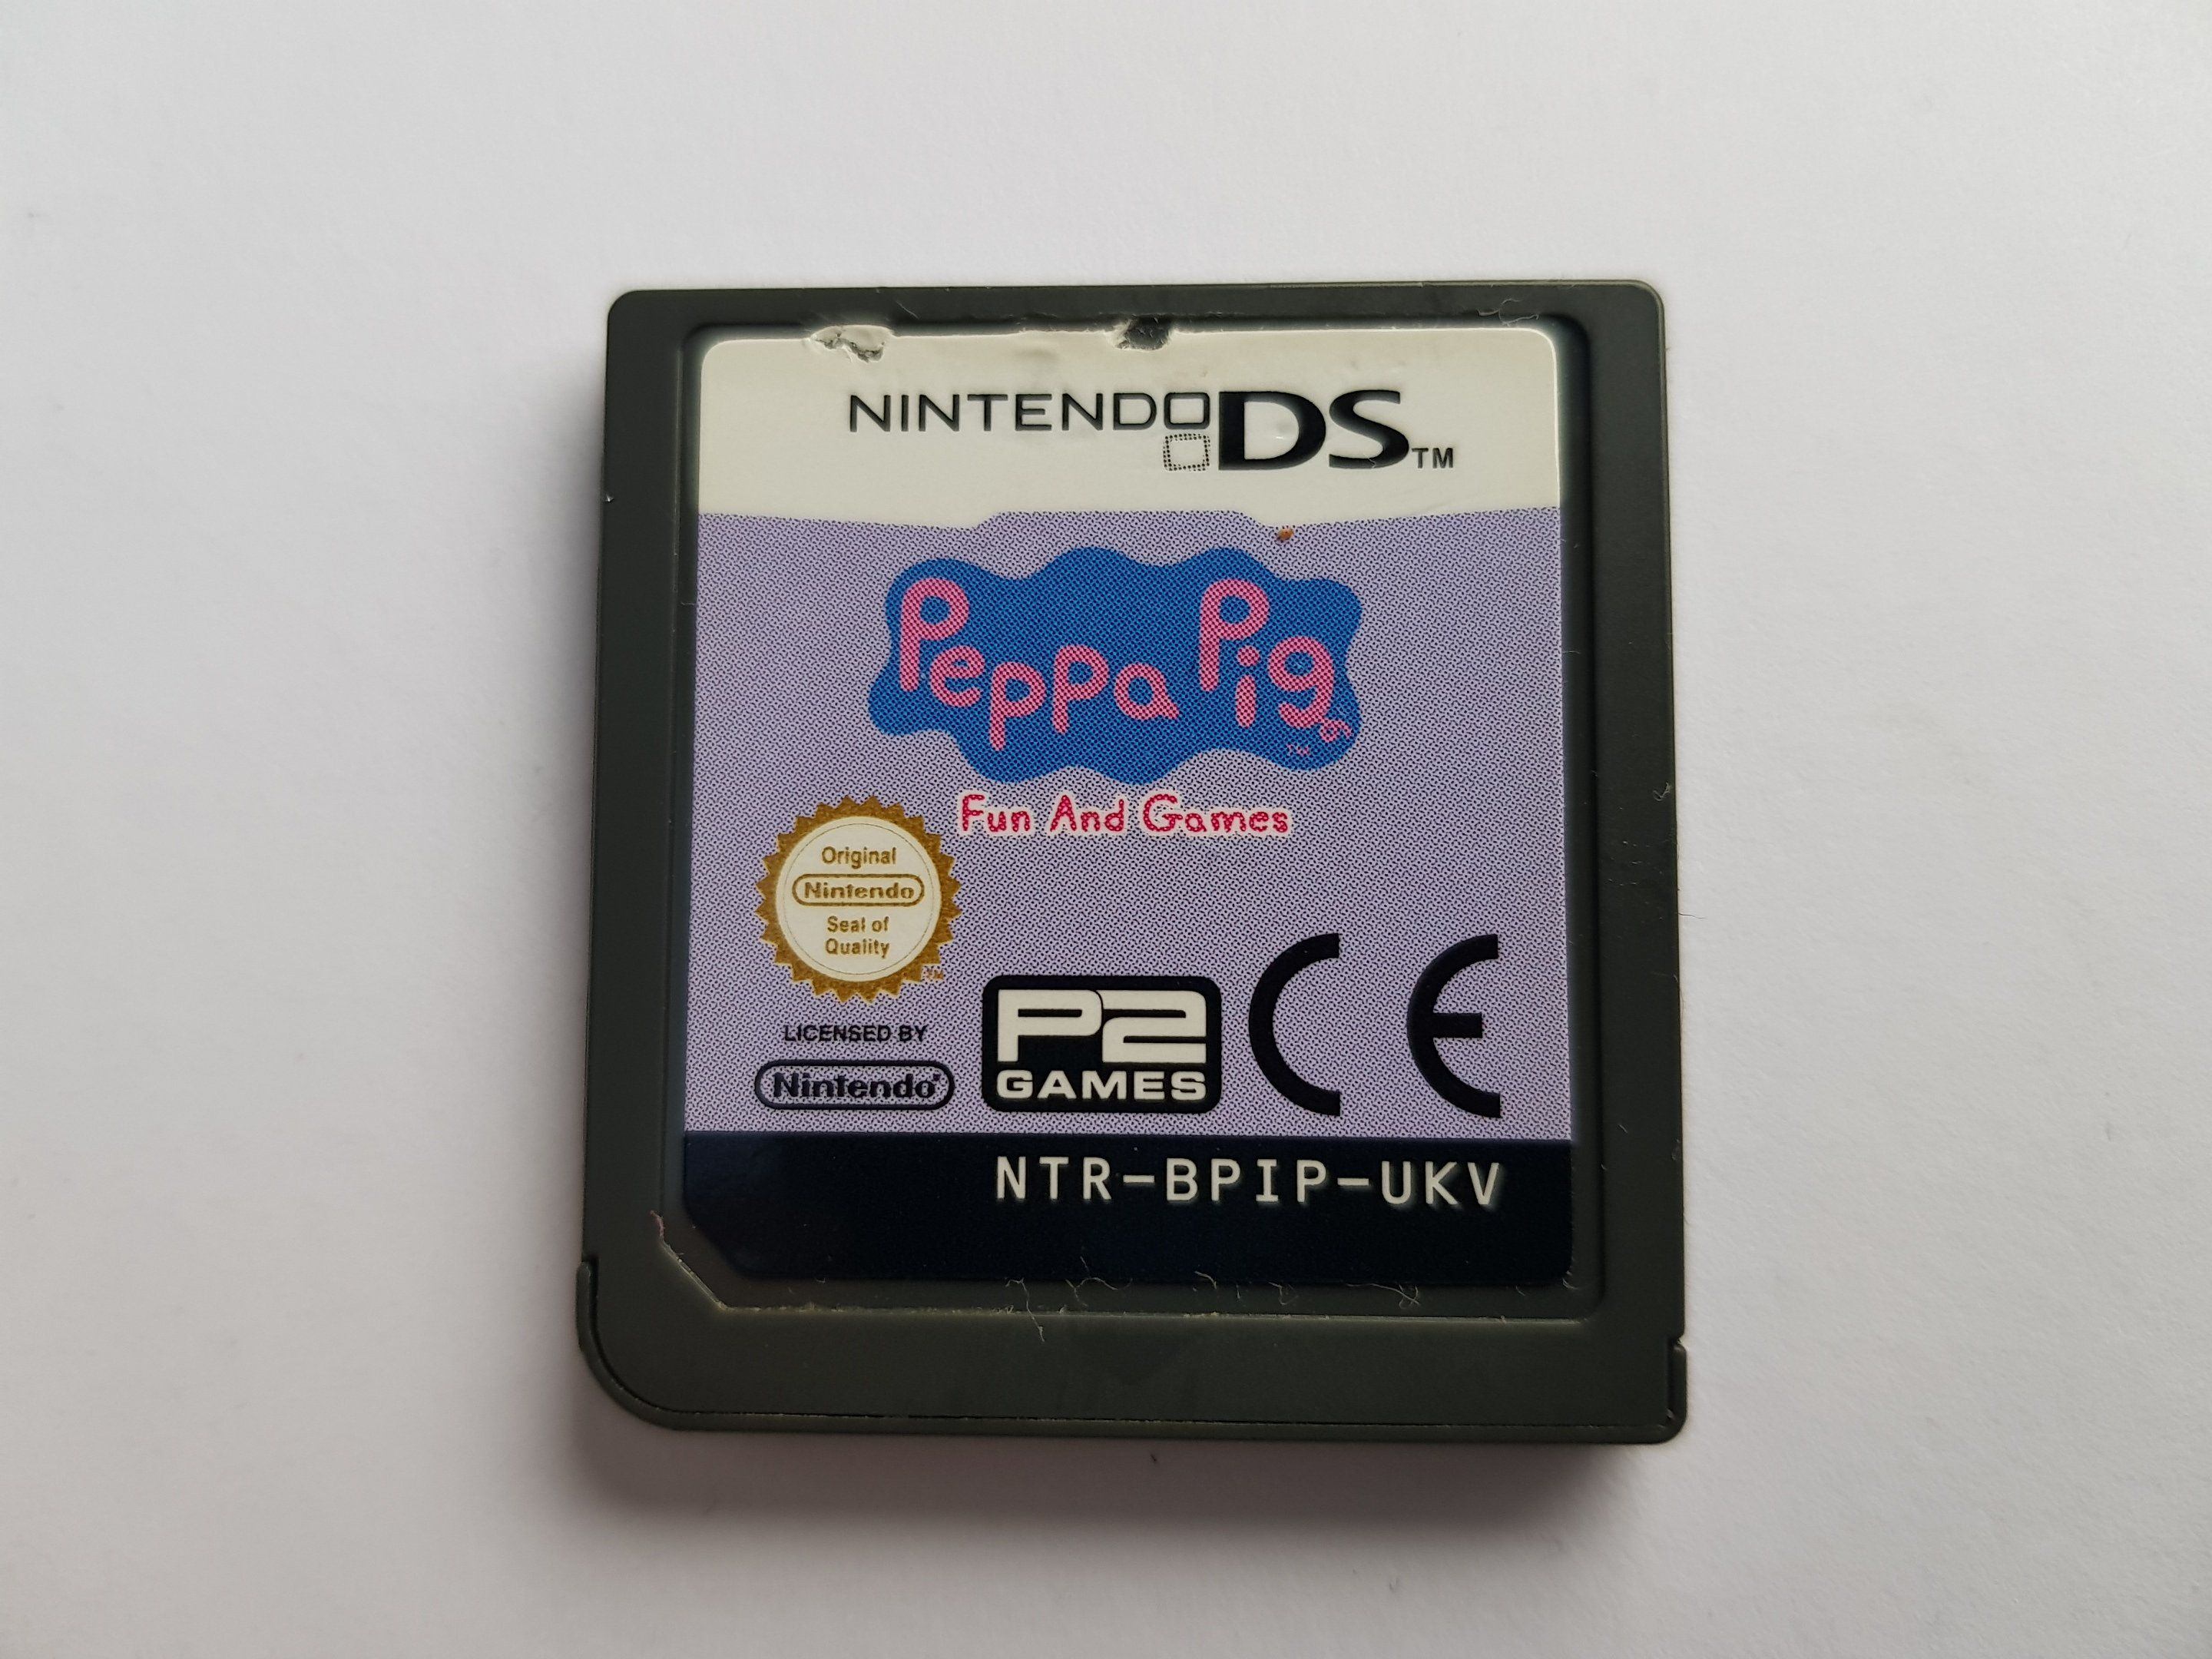 best of Nintendo games Peppa ds and pig fun